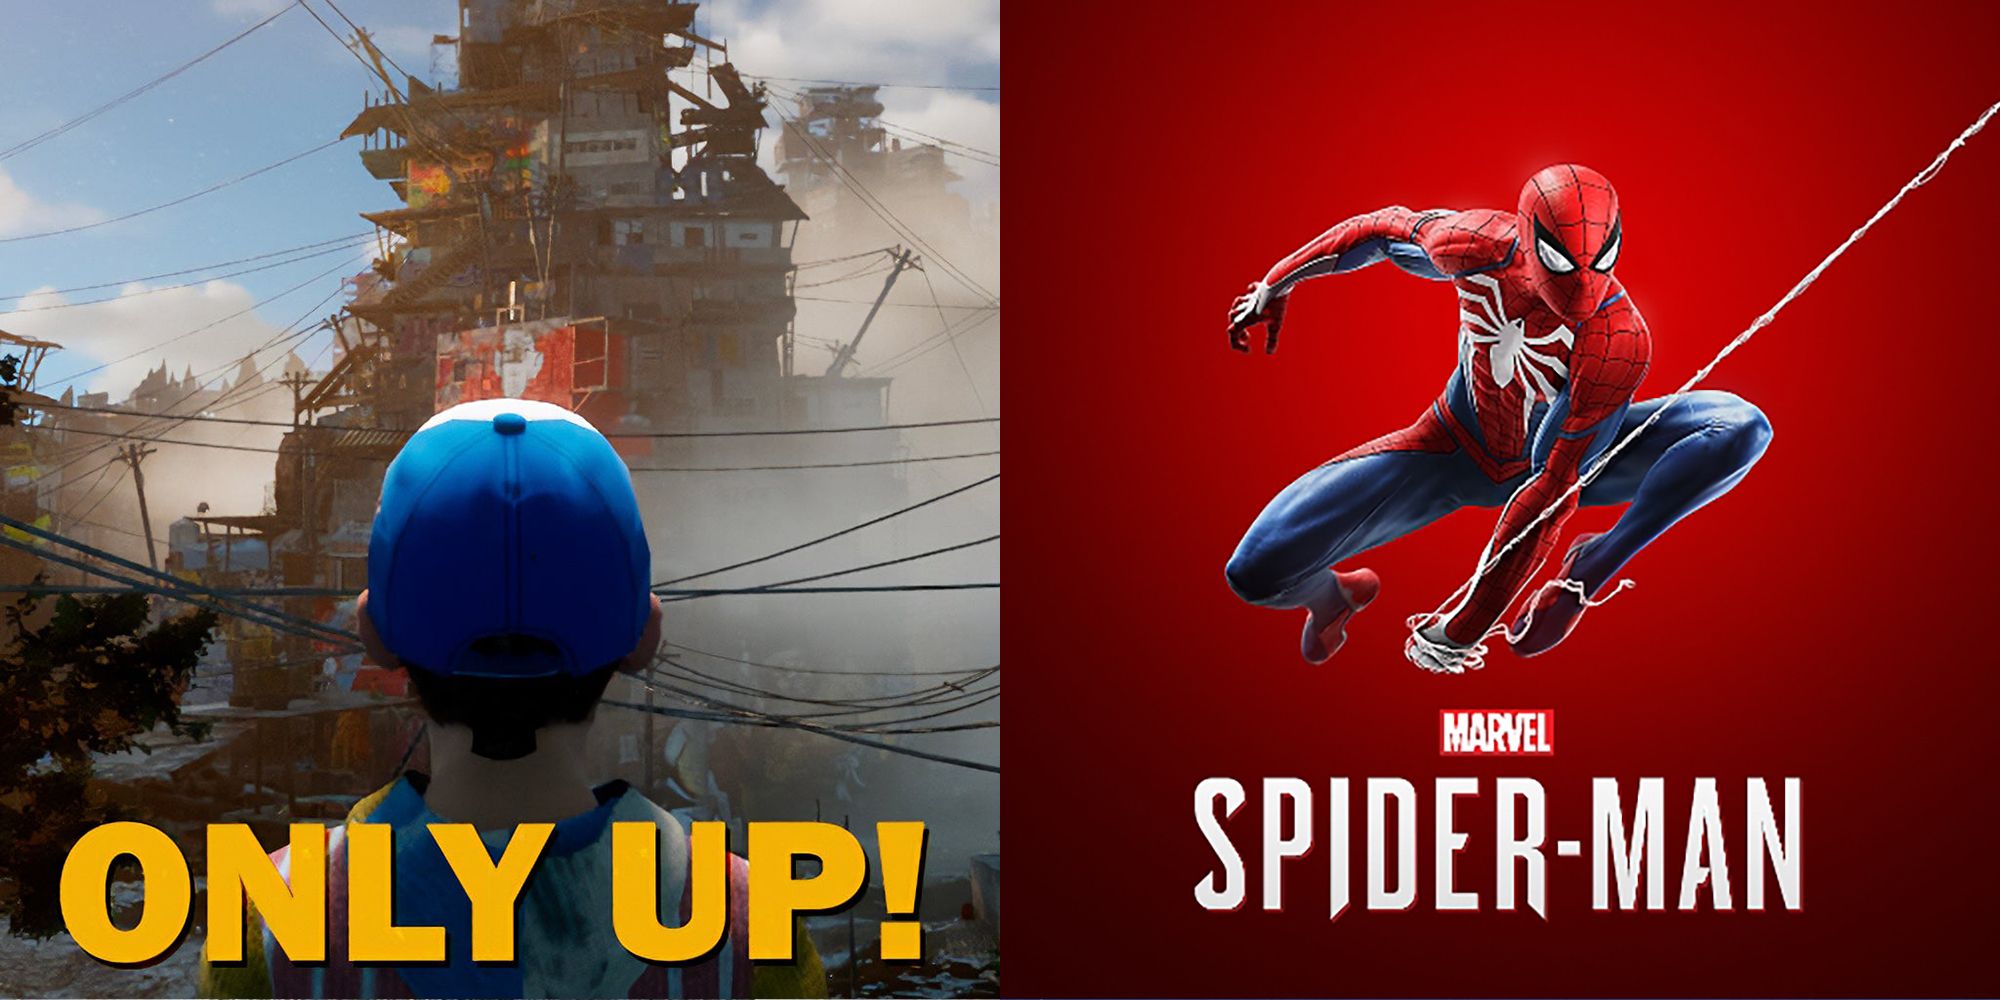 only up and marvel's spider-man